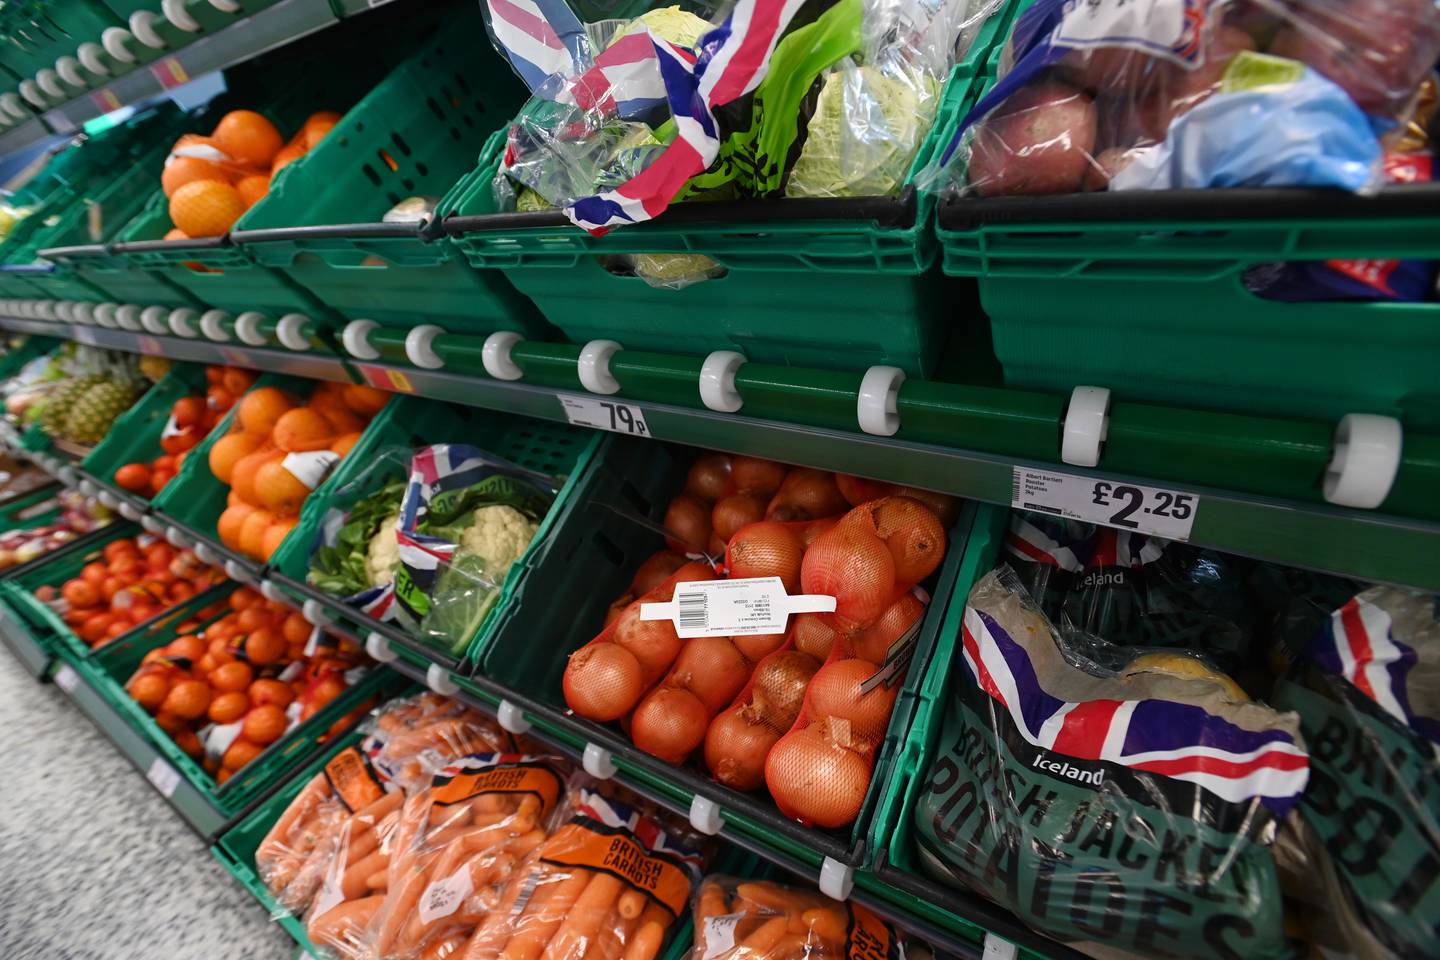 Fruit and vegetables on display at a supermarket in London on April 28. EPA